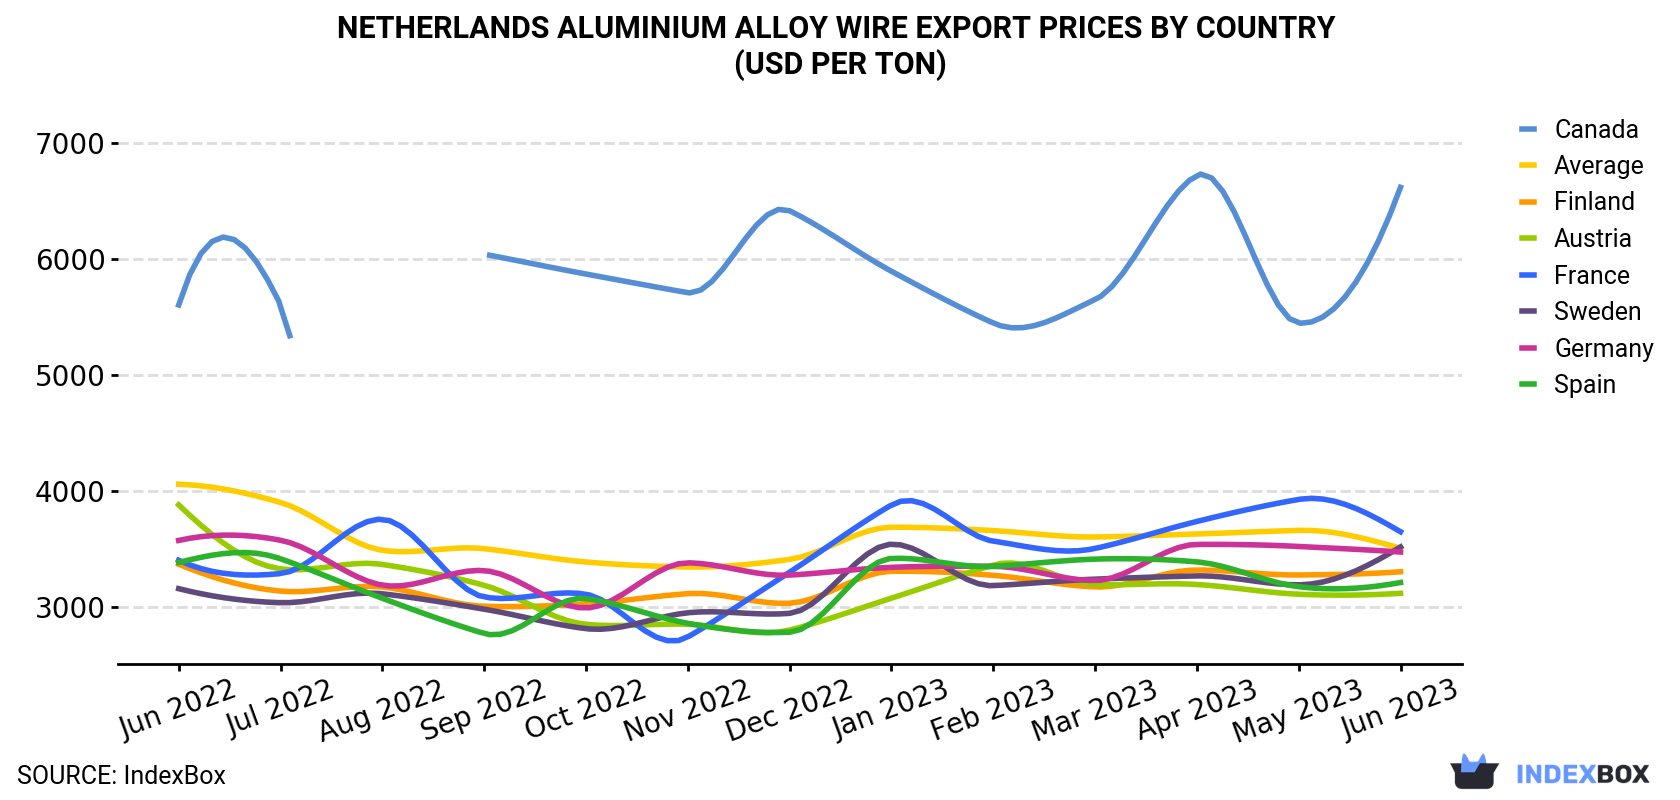 Netherlands Aluminium Alloy Wire Export Prices By Country (USD Per Ton)